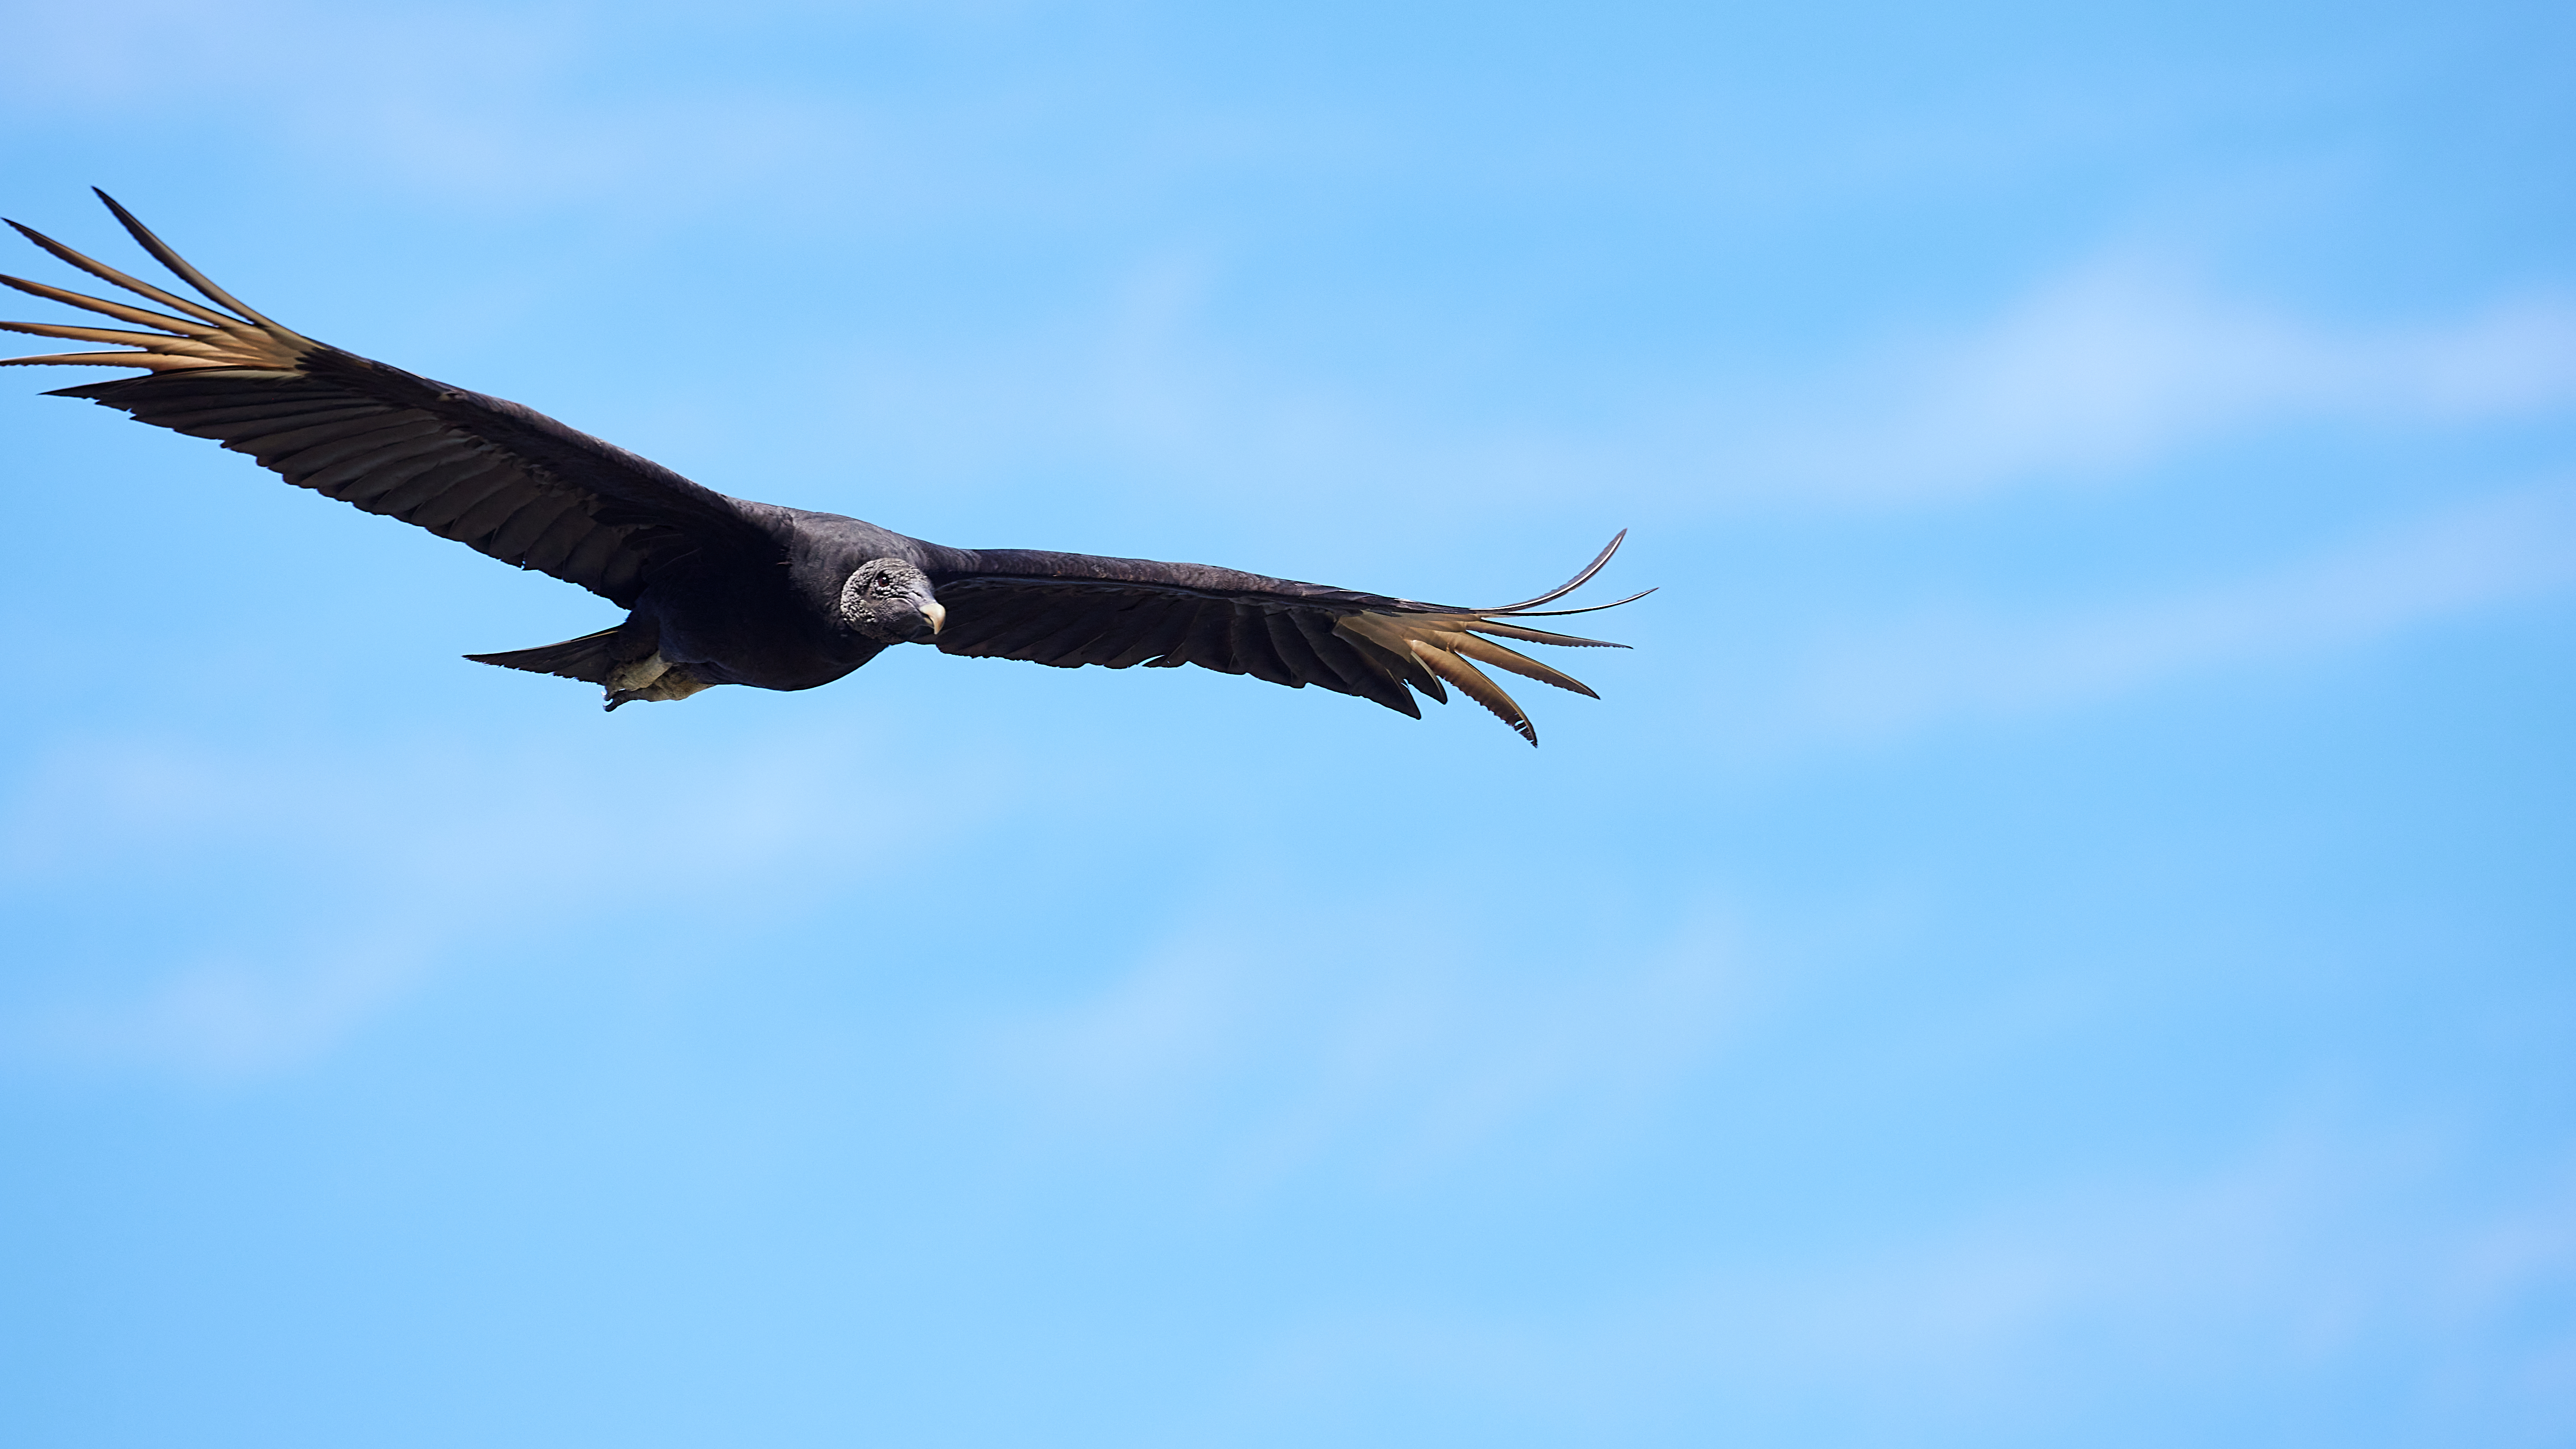 Black vulture, ubiquitous, hunts at great heights by sight - image 19